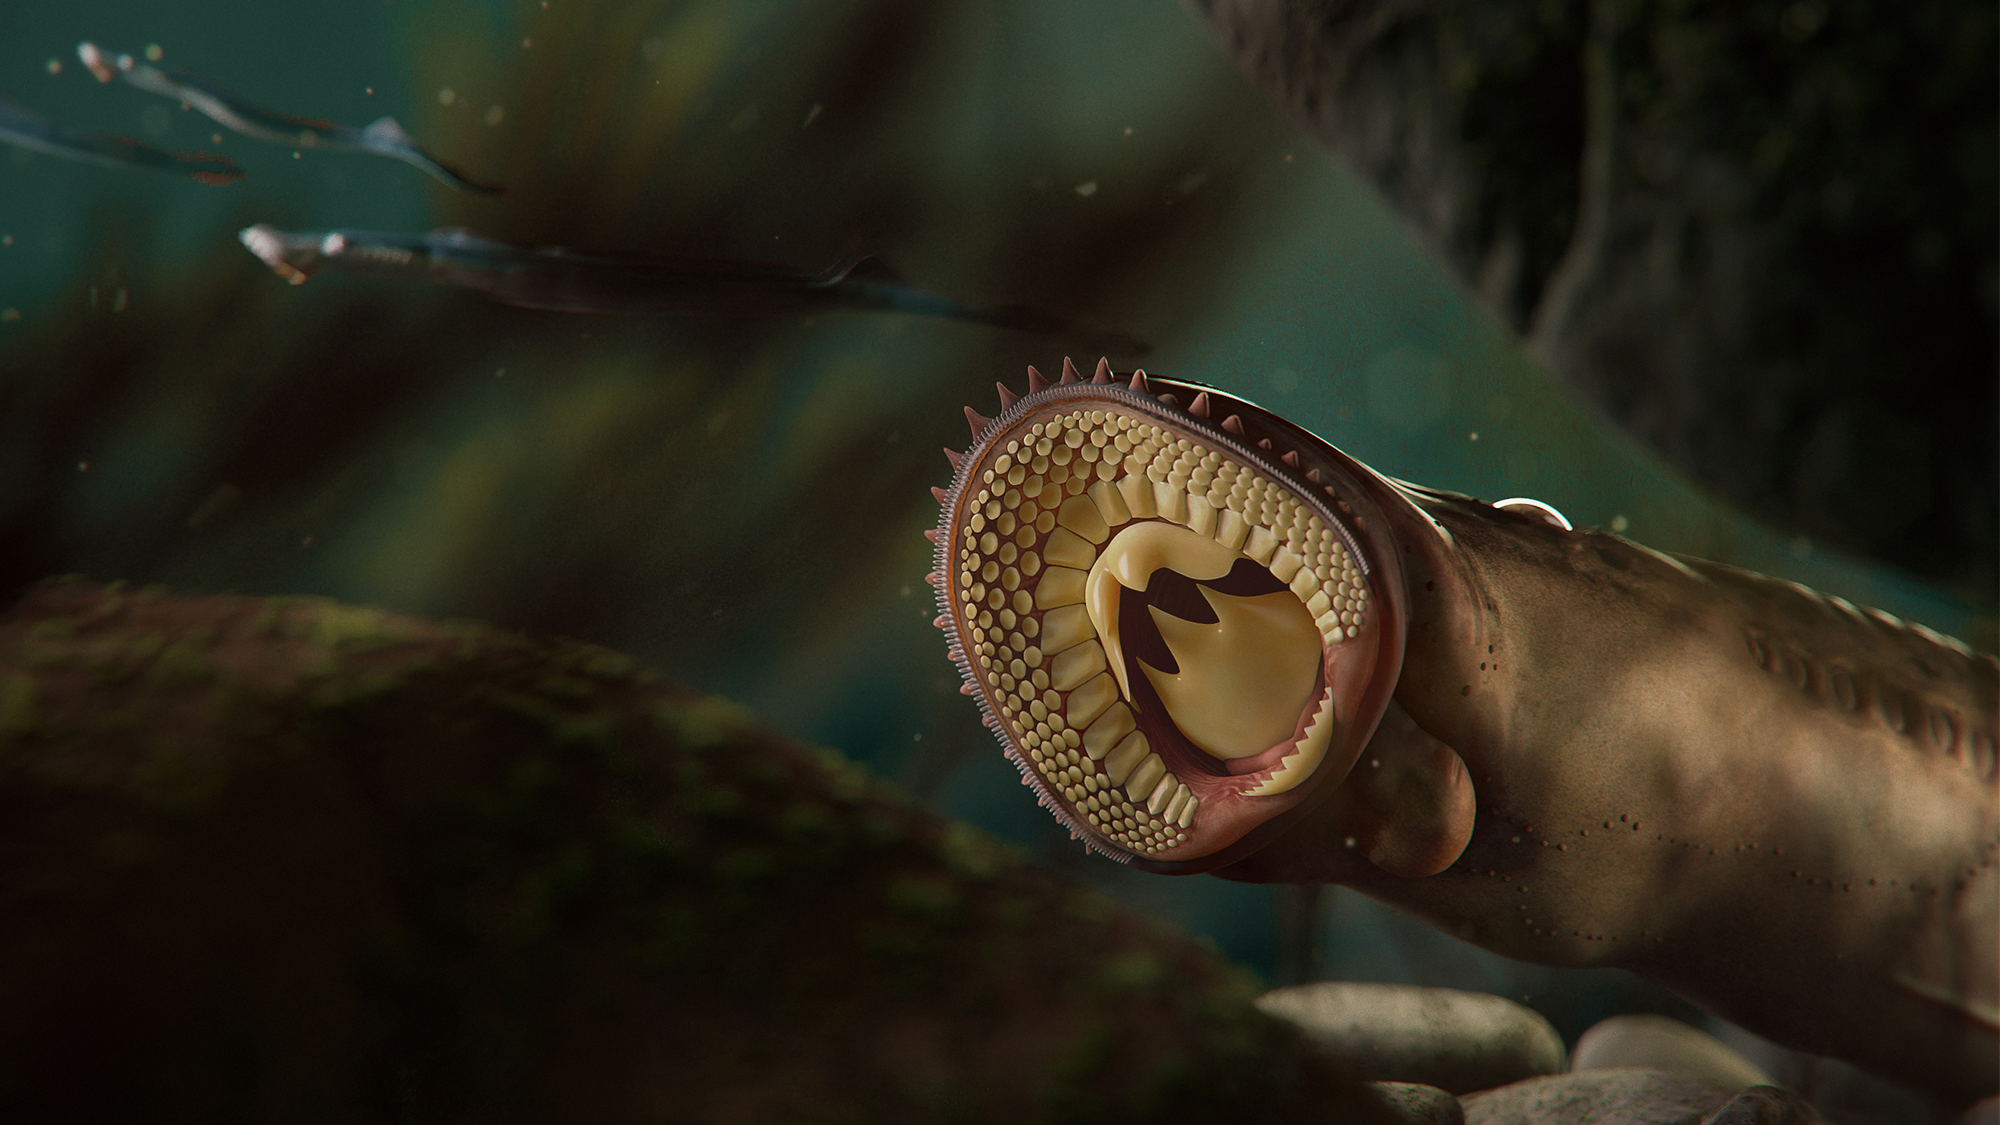 An artist's illustration of an early lamprey's teeth and sucker. The Jurassic lampreys Yanliaomyzon had a feeding apparatus that surprisingly resembles that of the pouched lampreys. It foreshadows the ancestral flesh-eating habit of present day. lampreys.